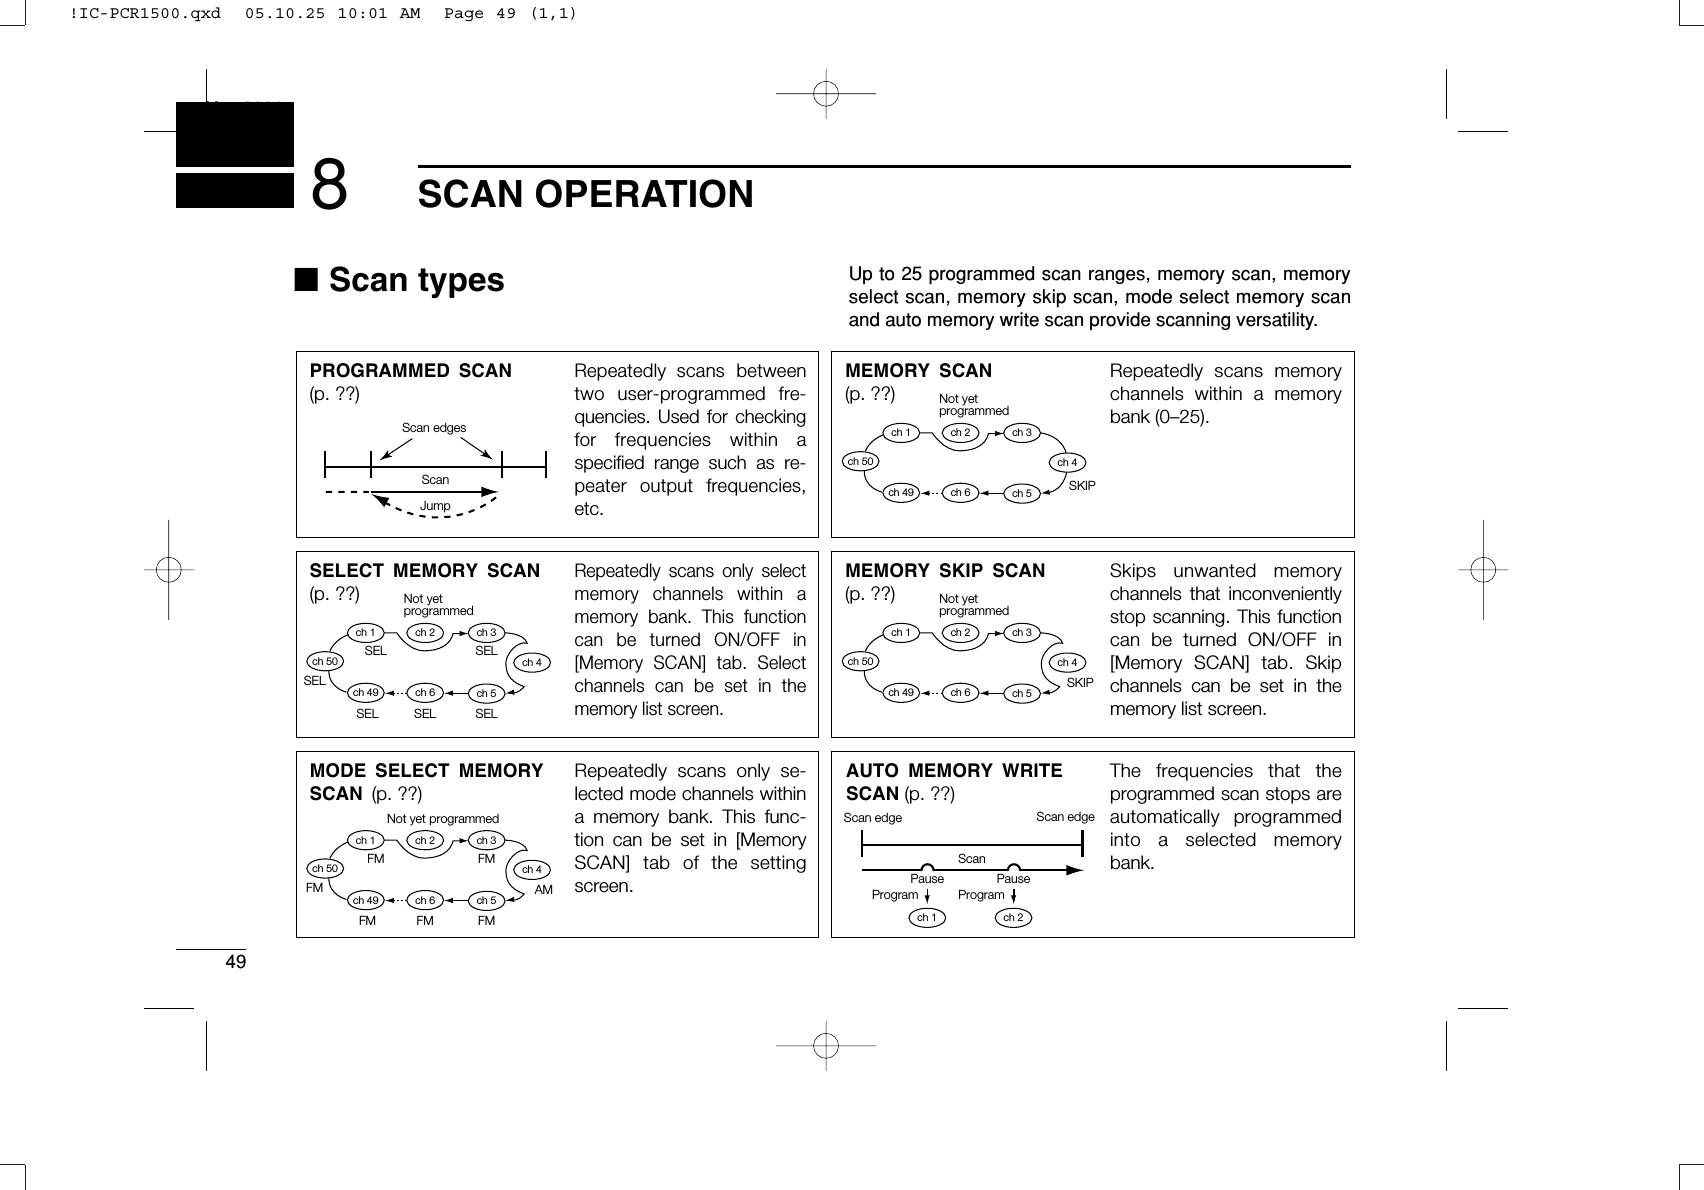 49SCAN OPERATIONNew20018■Scan types Up to 25 programmed scan ranges, memory scan, memoryselect scan, memory skip scan, mode select memory scanand auto memory write scan provide scanning versatility.PROGRAMMED SCAN(p. ??)Repeatedly scans between two user-programmed fre-quencies. Used for checking for frequencies within a specified range such as re-peater output frequencies, etc.ScanJumpScan edgesScan edge Scan edgeSELECT MEMORY SCAN(p. ??)Repeatedly scans only select memory channels within a memory bank. This function can be turned ON/OFF in [Memory SCAN] tab. Select channels can be set in the memory list screen.Not yetprogrammedch 50ch 1 ch 2 ch 3ch 4ch 5ch 6ch 49Not yet programmedch 50ch 1 ch 2 ch 3ch 4ch 5ch 6ch 49MEMORY SKIP SCAN(p. ??)Skips unwanted memory channels that inconveniently stop scanning. This function can be turned ON/OFF in [Memory SCAN] tab. Skip channels can be set in the memory list screen.Not yetprogrammedch 50ch 1 ch 2 ch 3ch 4ch 5ch 6ch 49MEMORY SCAN (p. ??)Repeatedly scans memory channels within a memory bank (0–25).Not yetprogrammedSKIPch 50ch 1 ch 2 ch 3SELSELSKIPSELSELSELSELMODE SELECT MEMORY SCAN (p. ??)Repeatedly scans only se-lected mode channels within a memory bank. This func-tion can be set in [Memory SCAN] tab of the setting screen.FMAMFMFMFMFMFMch 5ch 6ch 49ch 4AUTO MEMORY WRITESCAN (p. ??)The frequencies that the programmed scan stops are automatically programmed into a selected memory bank.ch 1 ch 2PauseProgram ProgramPauseScan!IC-PCR1500.qxd  05.10.25 10:01 AM  Page 49 (1,1)